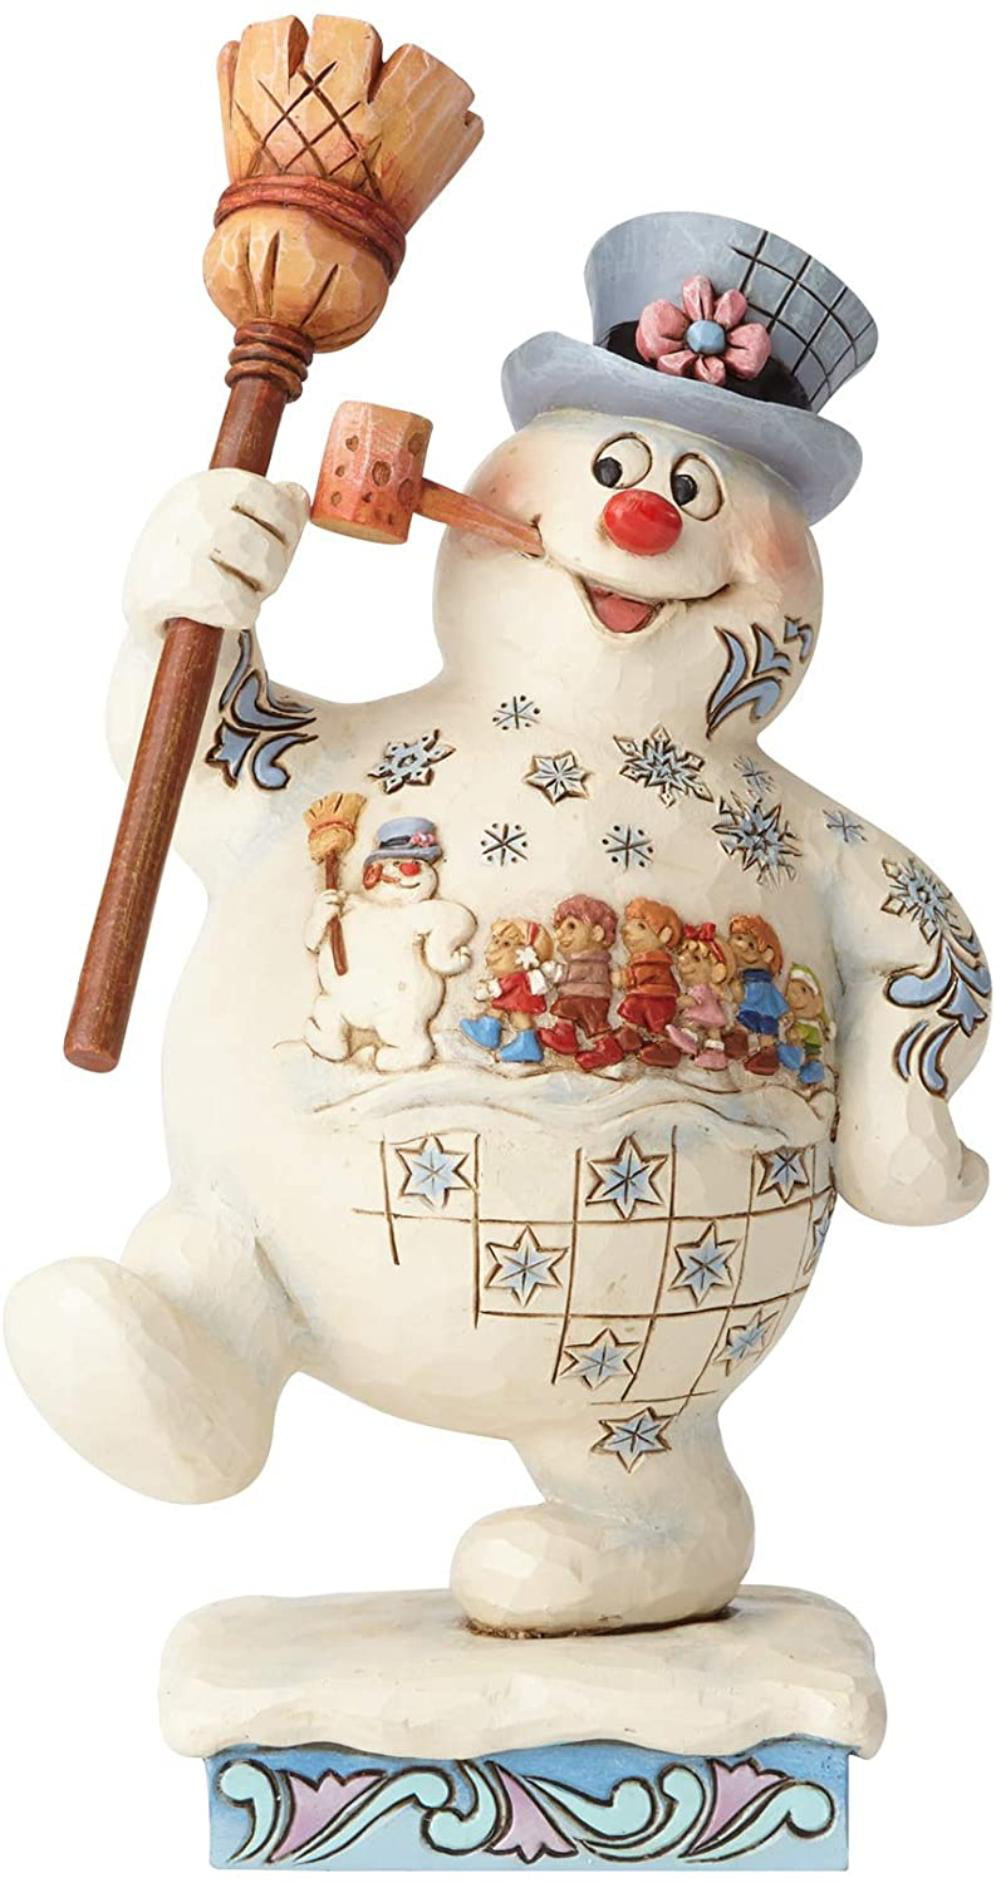 Enesco Frosty the Snowman by Jim Shore Marching Frosty w/Parade, Frosty  with Parade Scene” figurine from the Jim Shore “Frosty the Snowman”  collection 